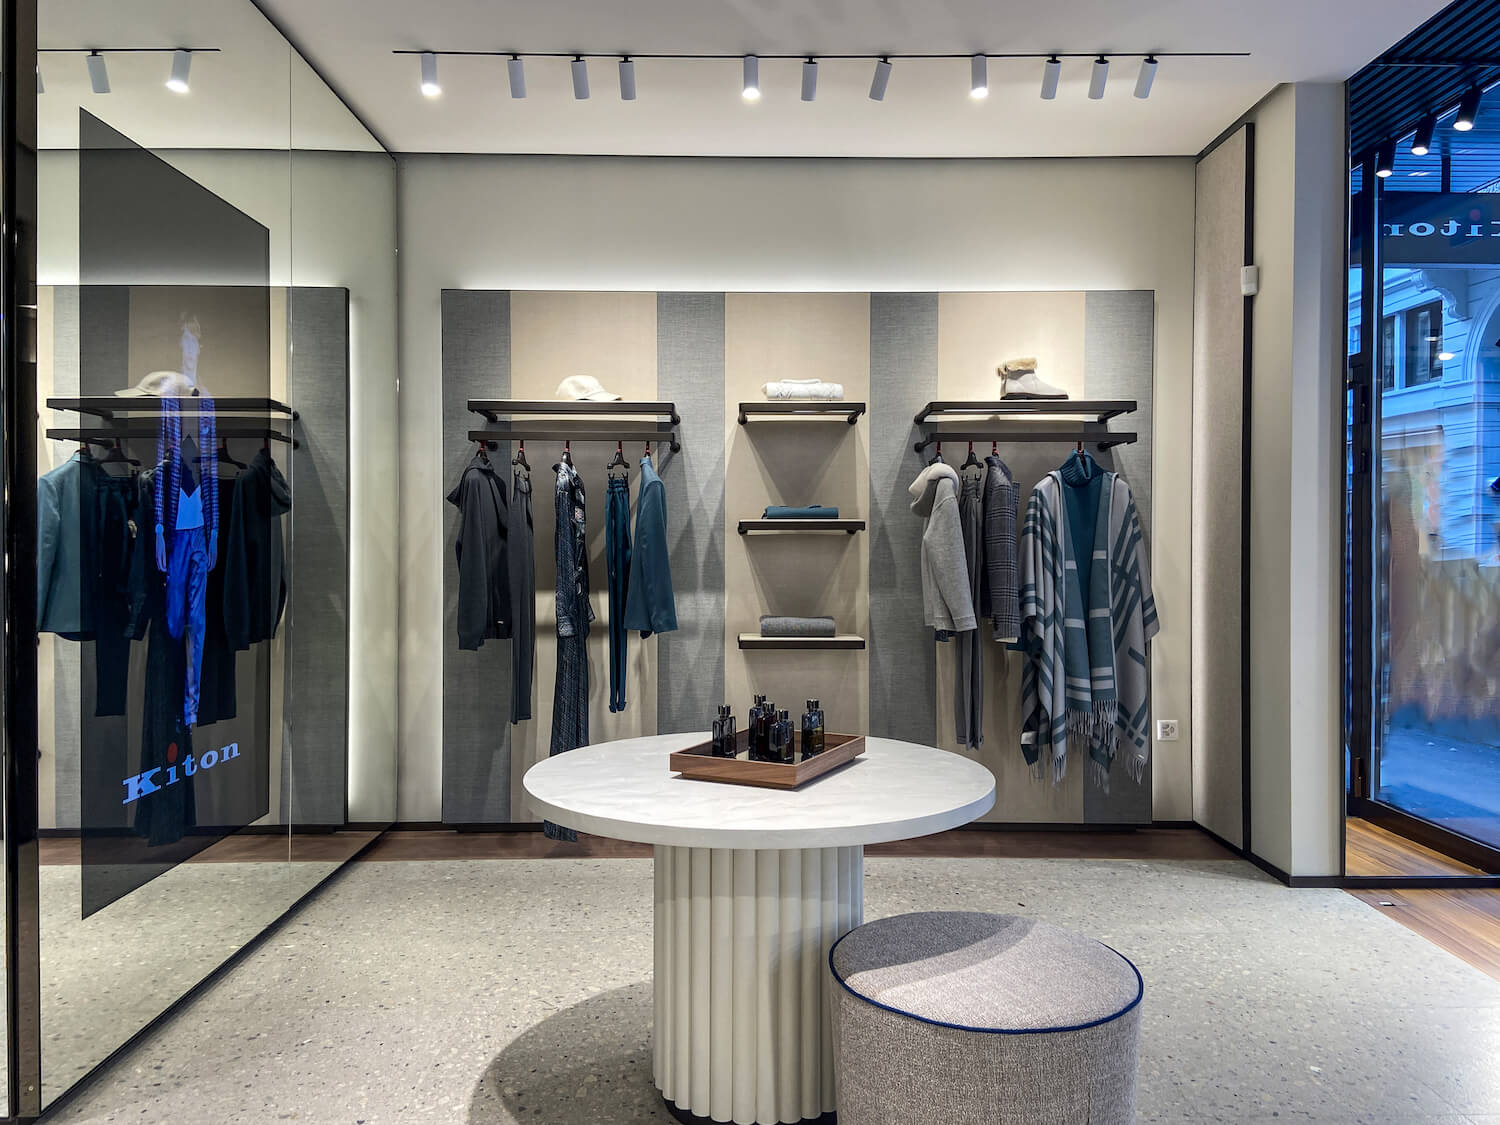 Studio B+Architects has redesigned the K|Store